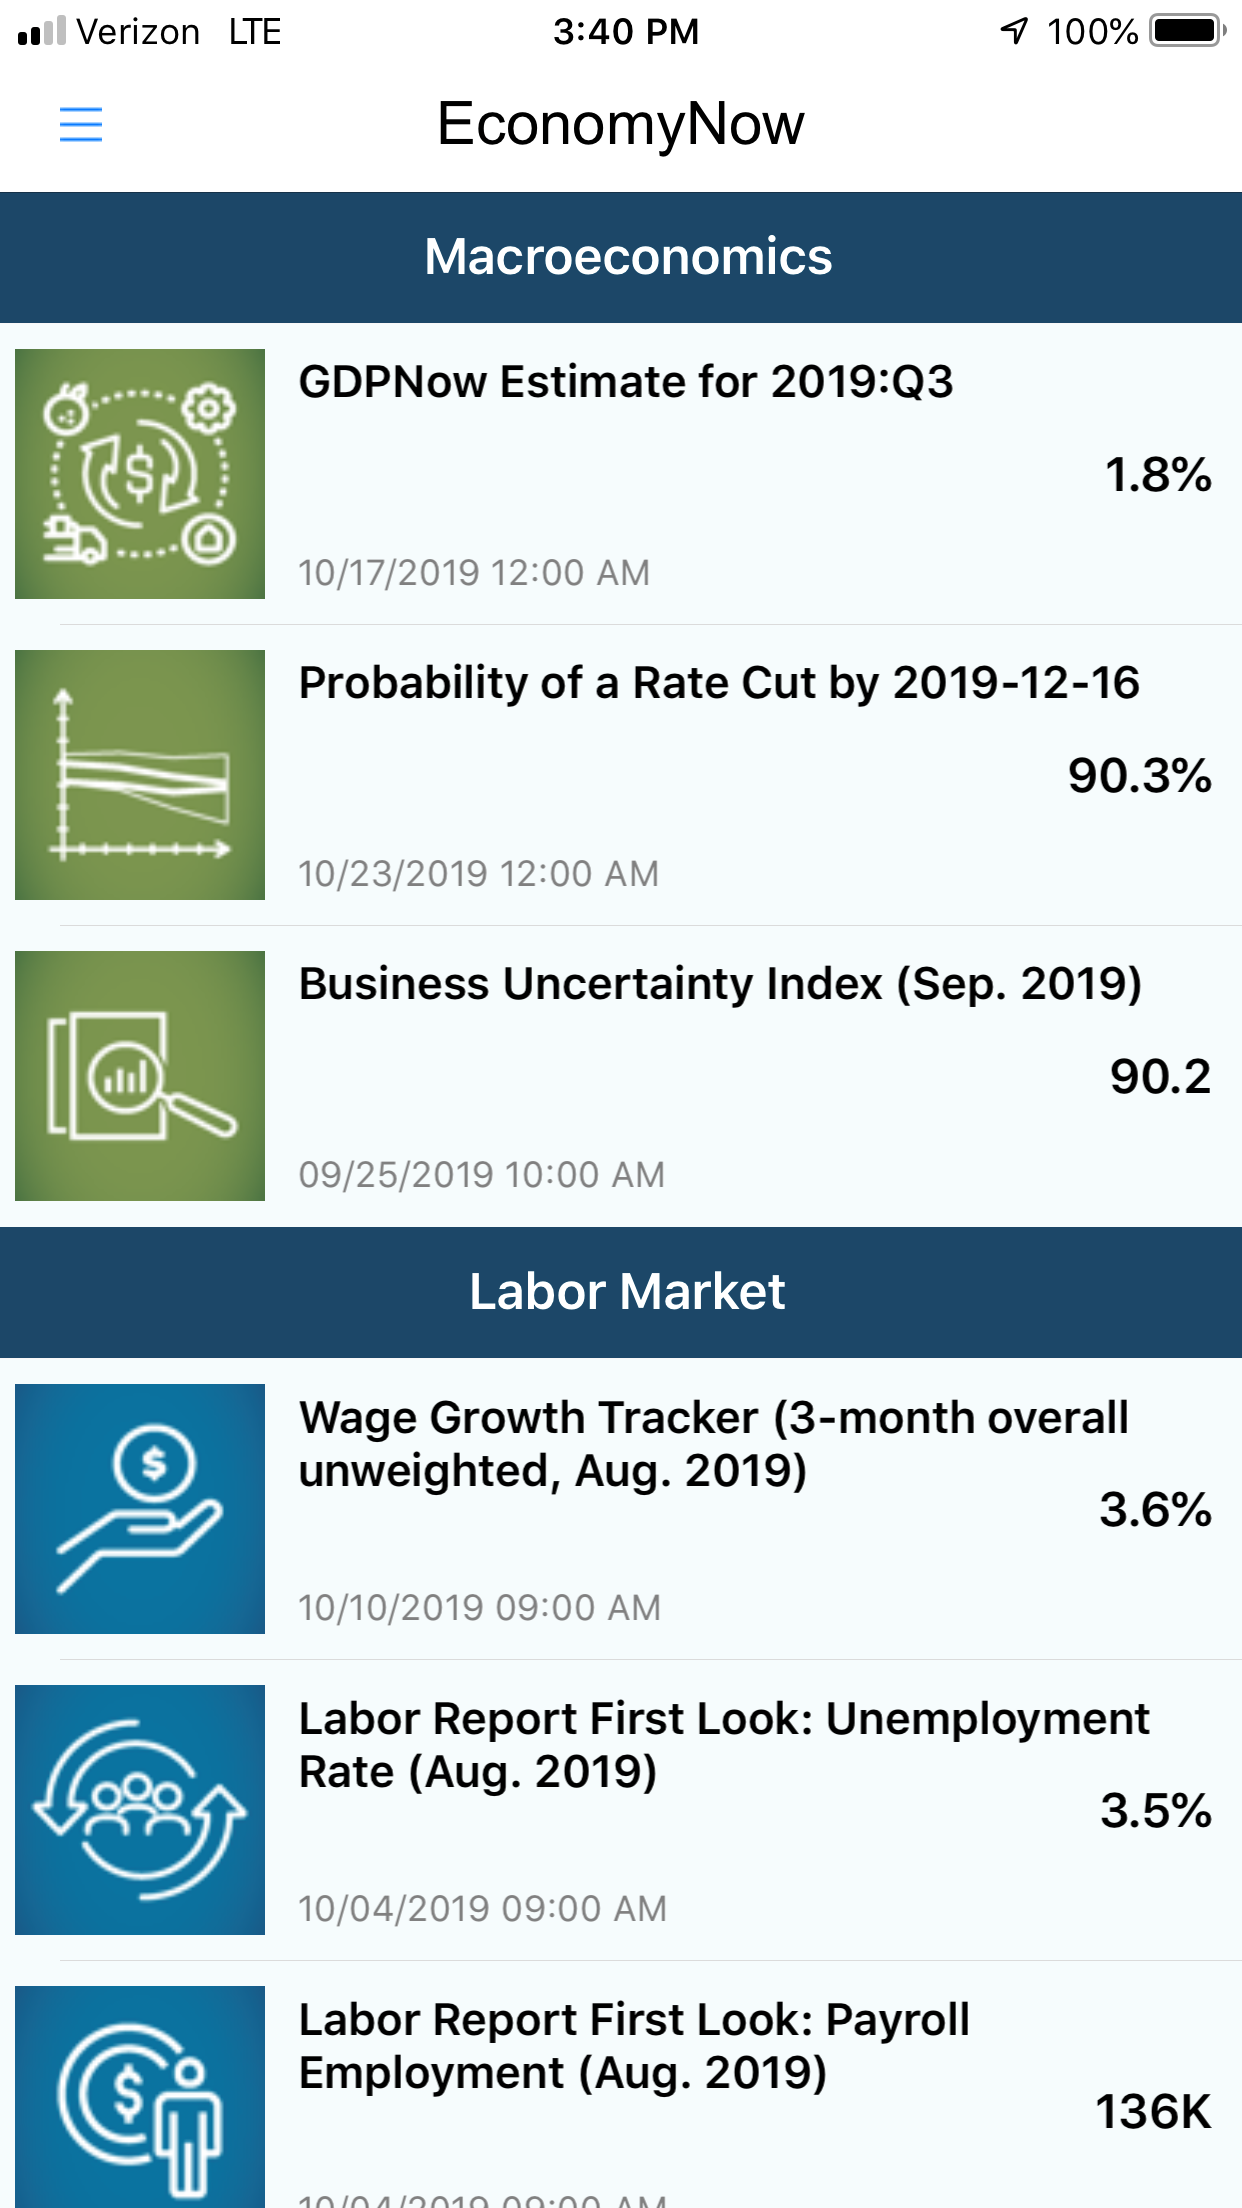 screenshot of the EconomyNow app showing the list of tools